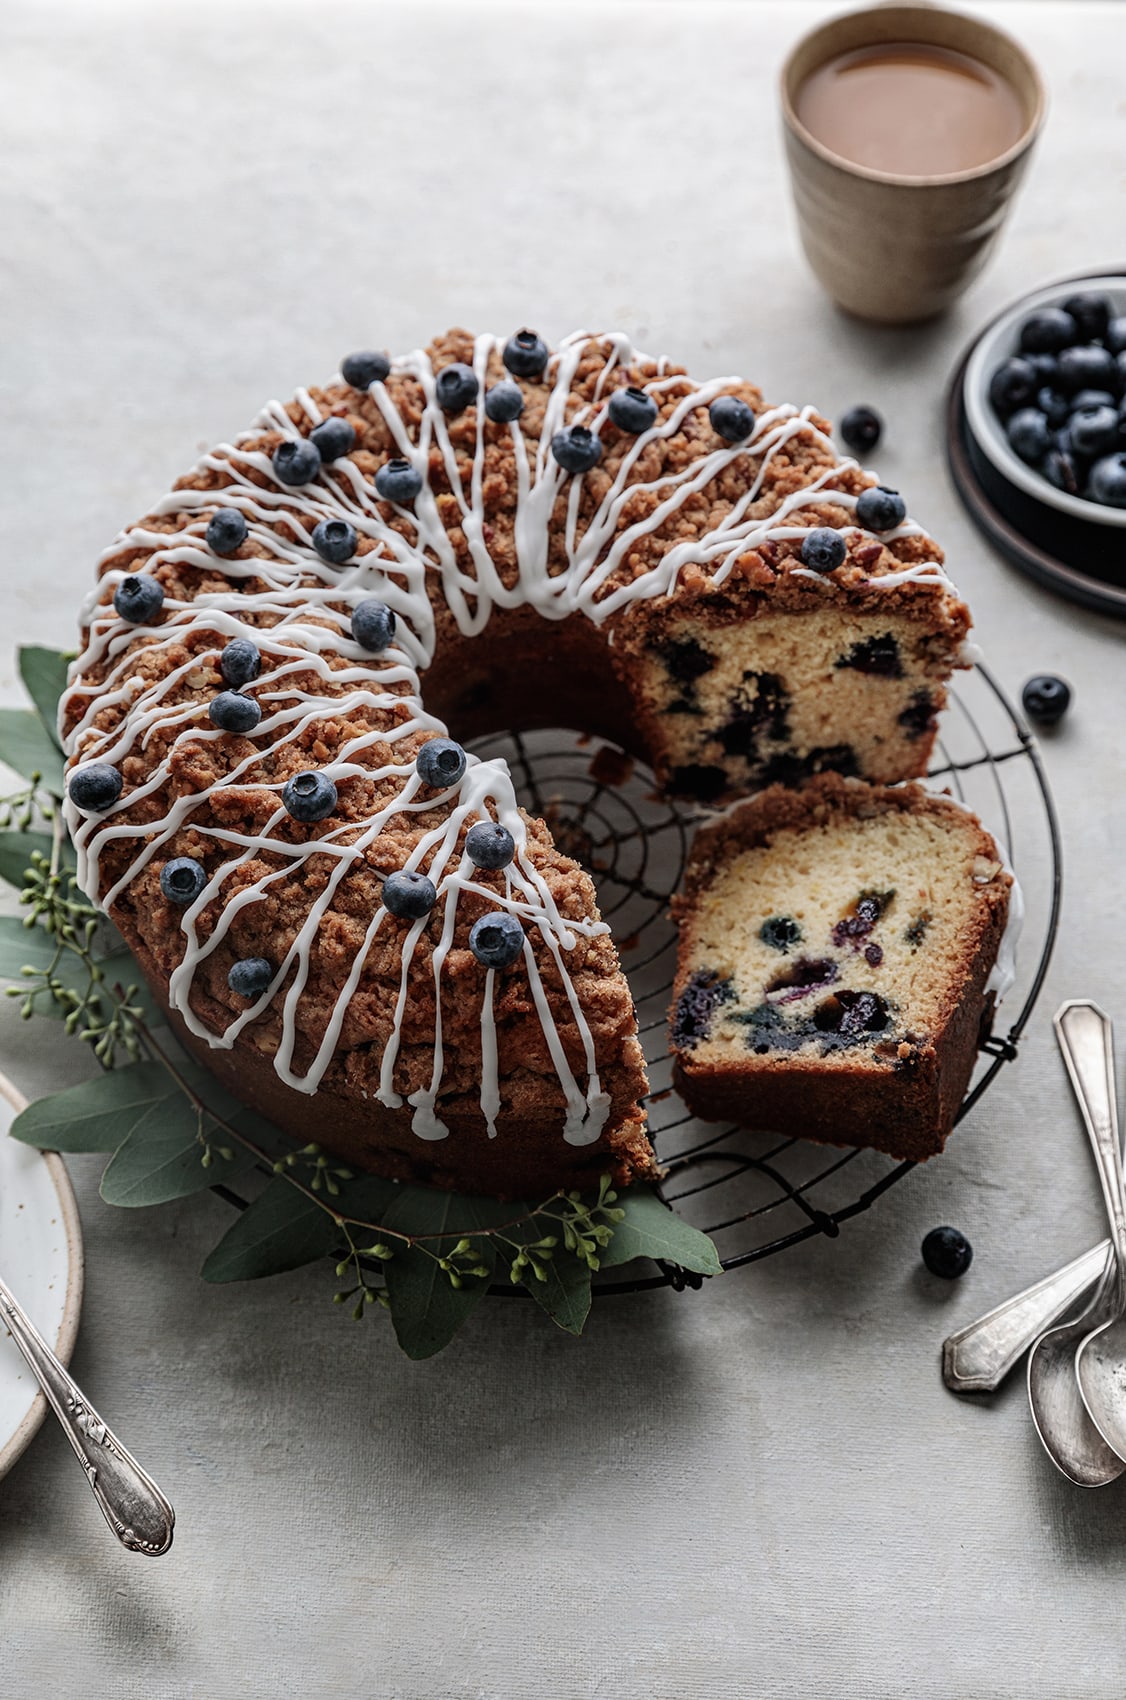 Classic Blueberry Coffee Cake  topped with a buttery pecan streusel and served warm, fresh out of the oven.